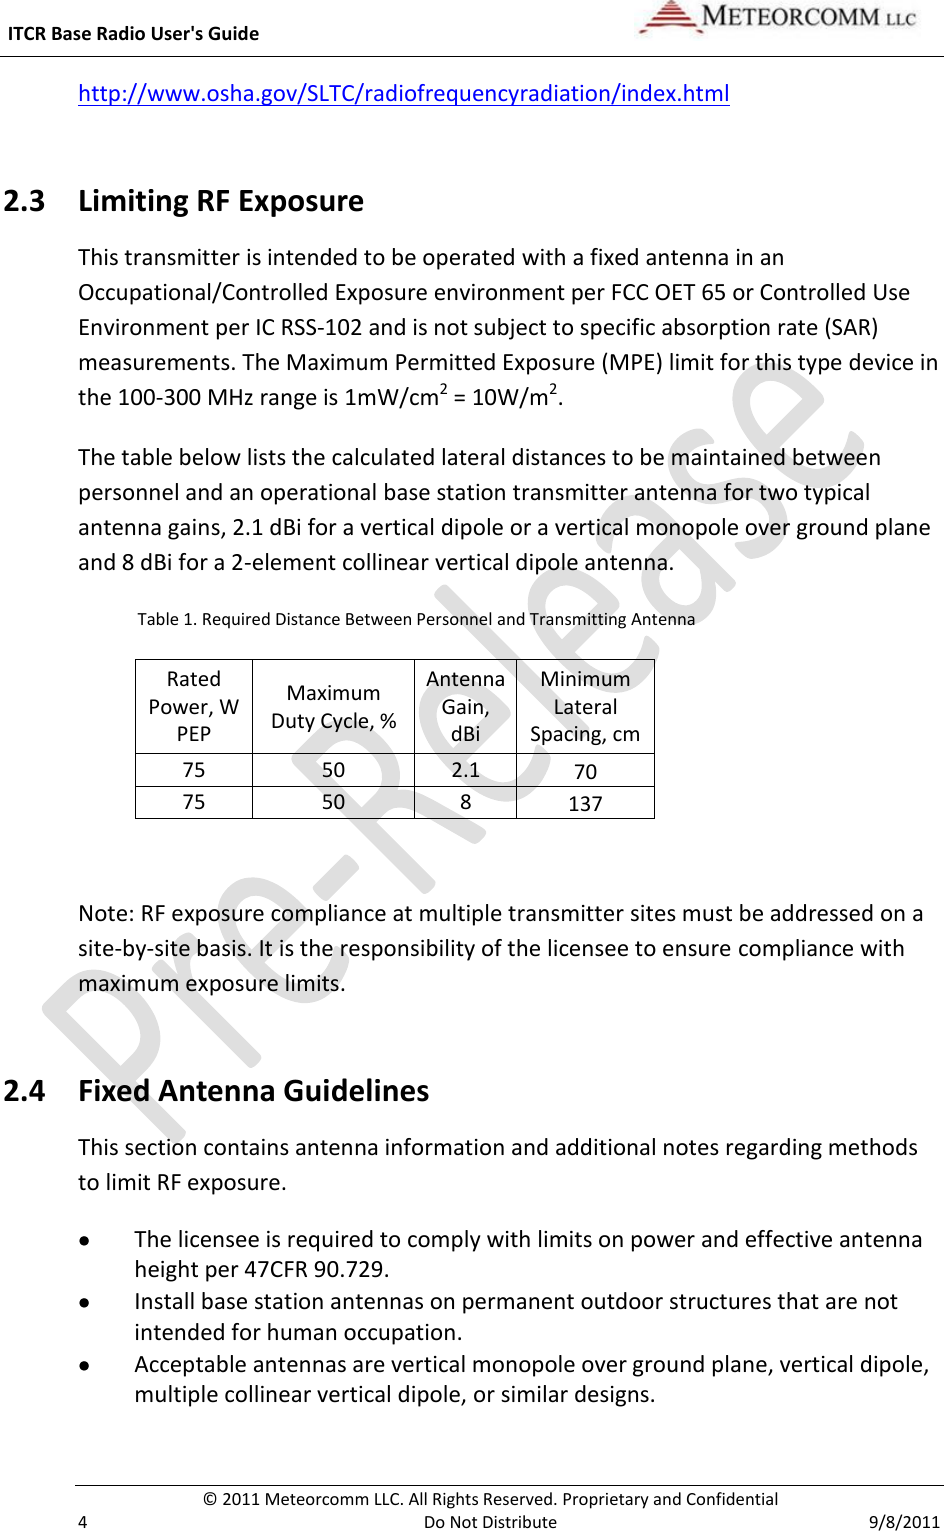  ITCR Base Radio User&apos;s Guide     © 2011 Meteorcomm LLC. All Rights Reserved. Proprietary and Confidential   4  Do Not Distribute  9/8/2011 http://www.osha.gov/SLTC/radiofrequencyradiation/index.html  2.3 Limiting RF Exposure This transmitter is intended to be operated with a fixed antenna in an Occupational/Controlled Exposure environment per FCC OET 65 or Controlled Use Environment per IC RSS-102 and is not subject to specific absorption rate (SAR) measurements. The Maximum Permitted Exposure (MPE) limit for this type device in the 100-300 MHz range is 1mW/cm2 = 10W/m2. The table below lists the calculated lateral distances to be maintained between personnel and an operational base station transmitter antenna for two typical antenna gains, 2.1 dBi for a vertical dipole or a vertical monopole over ground plane and 8 dBi for a 2-element collinear vertical dipole antenna.                Table 1. Required Distance Between Personnel and Transmitting Antenna Rated Power, W PEP Maximum Duty Cycle, % Antenna Gain, dBi Minimum Lateral Spacing, cm 75 50 2.1 70 75 50 8 137  Note: RF exposure compliance at multiple transmitter sites must be addressed on a site-by-site basis. It is the responsibility of the licensee to ensure compliance with maximum exposure limits. 2.4 Fixed Antenna Guidelines  This section contains antenna information and additional notes regarding methods to limit RF exposure.  The licensee is required to comply with limits on power and effective antenna height per 47CFR 90.729.   Install base station antennas on permanent outdoor structures that are not intended for human occupation.  Acceptable antennas are vertical monopole over ground plane, vertical dipole, multiple collinear vertical dipole, or similar designs. 